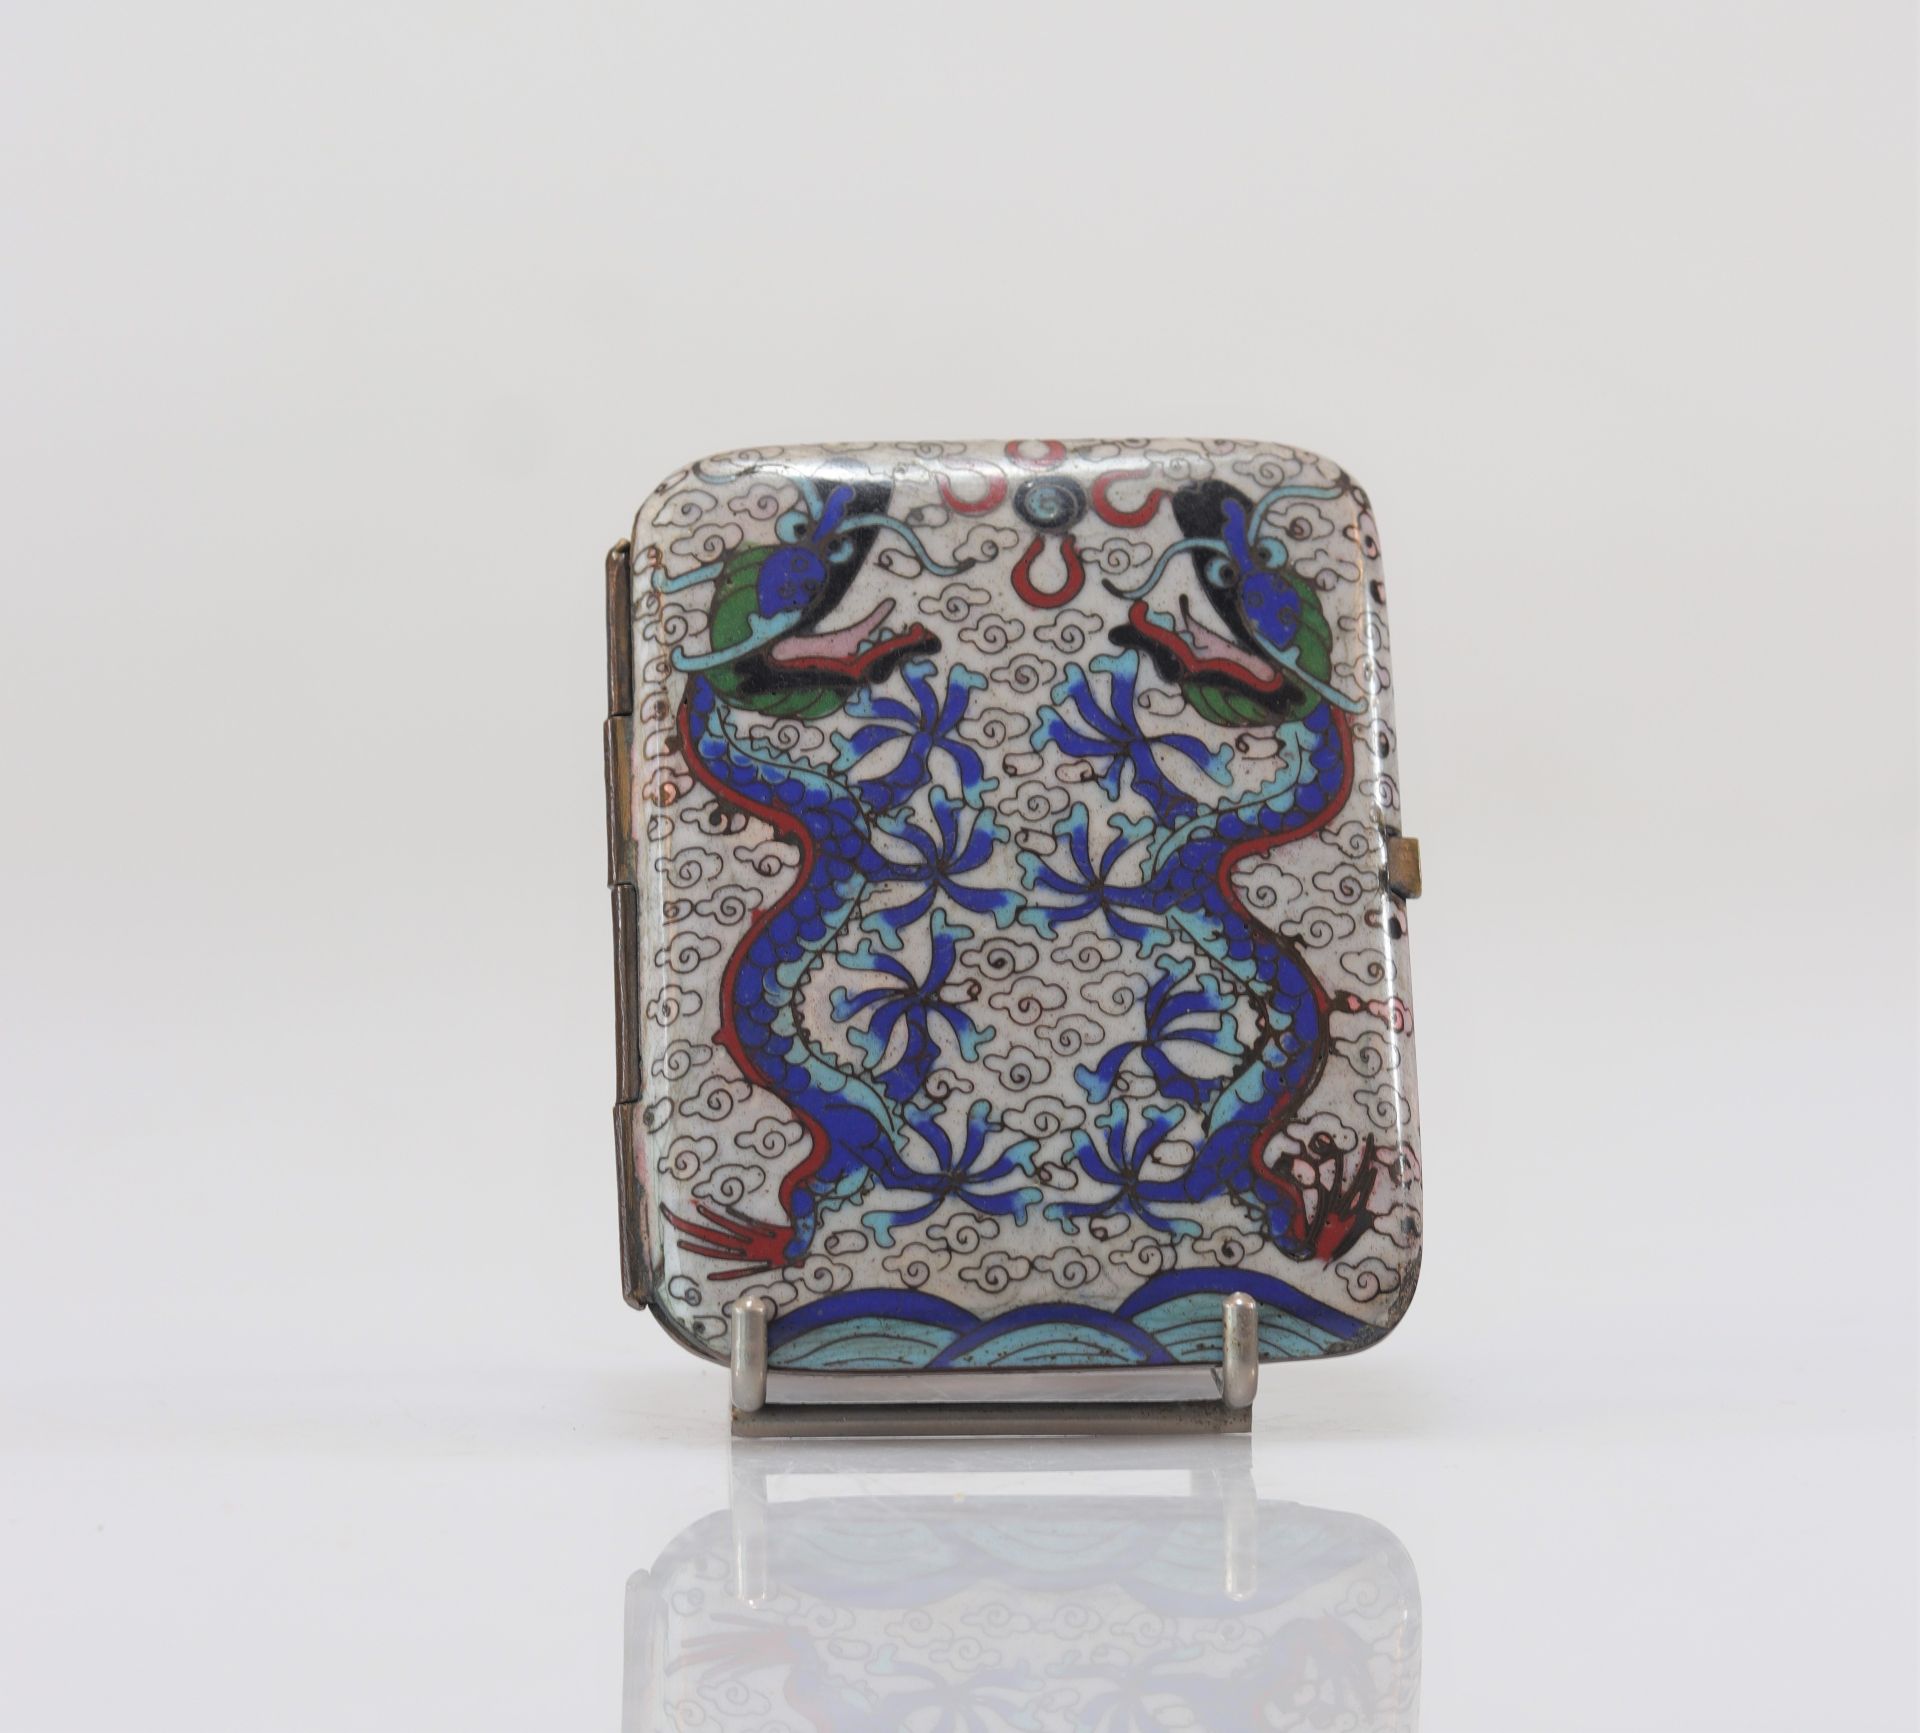 Cloisonne card holder decorated with dragons - Image 2 of 4